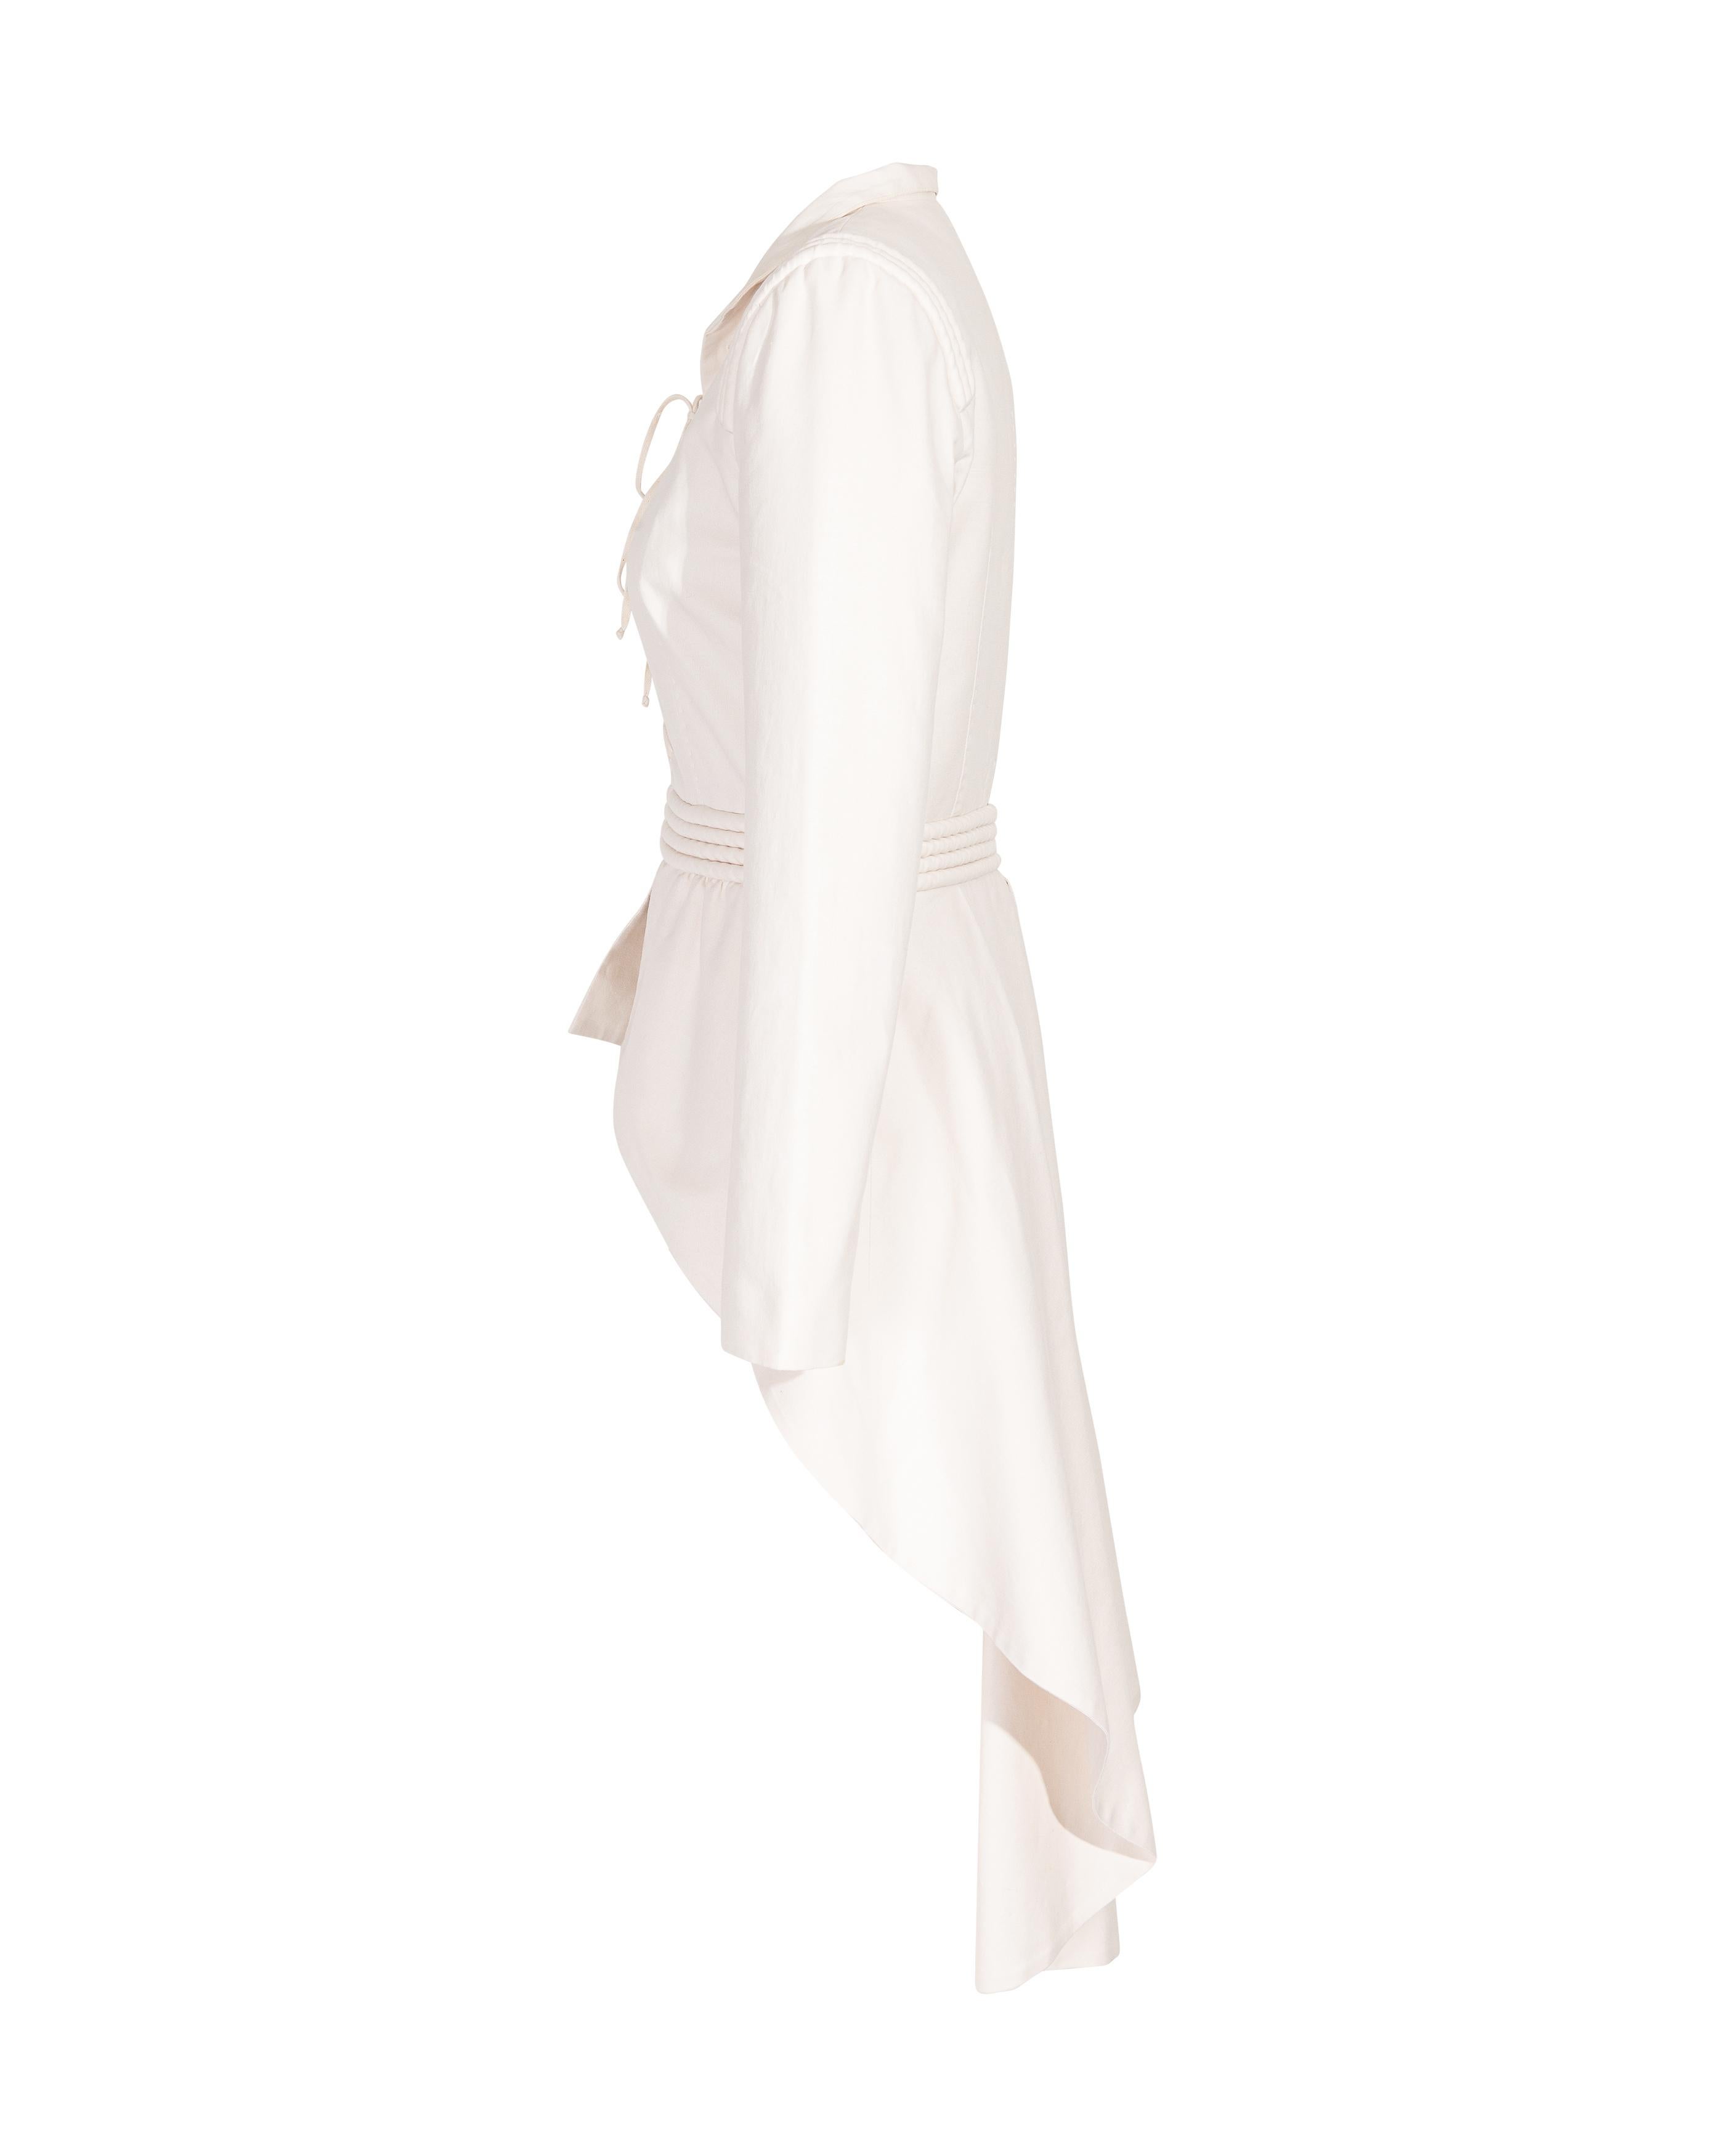 S/S 2002 Givenchy Cotton Cream High-Low Jacket and Pant Set 7